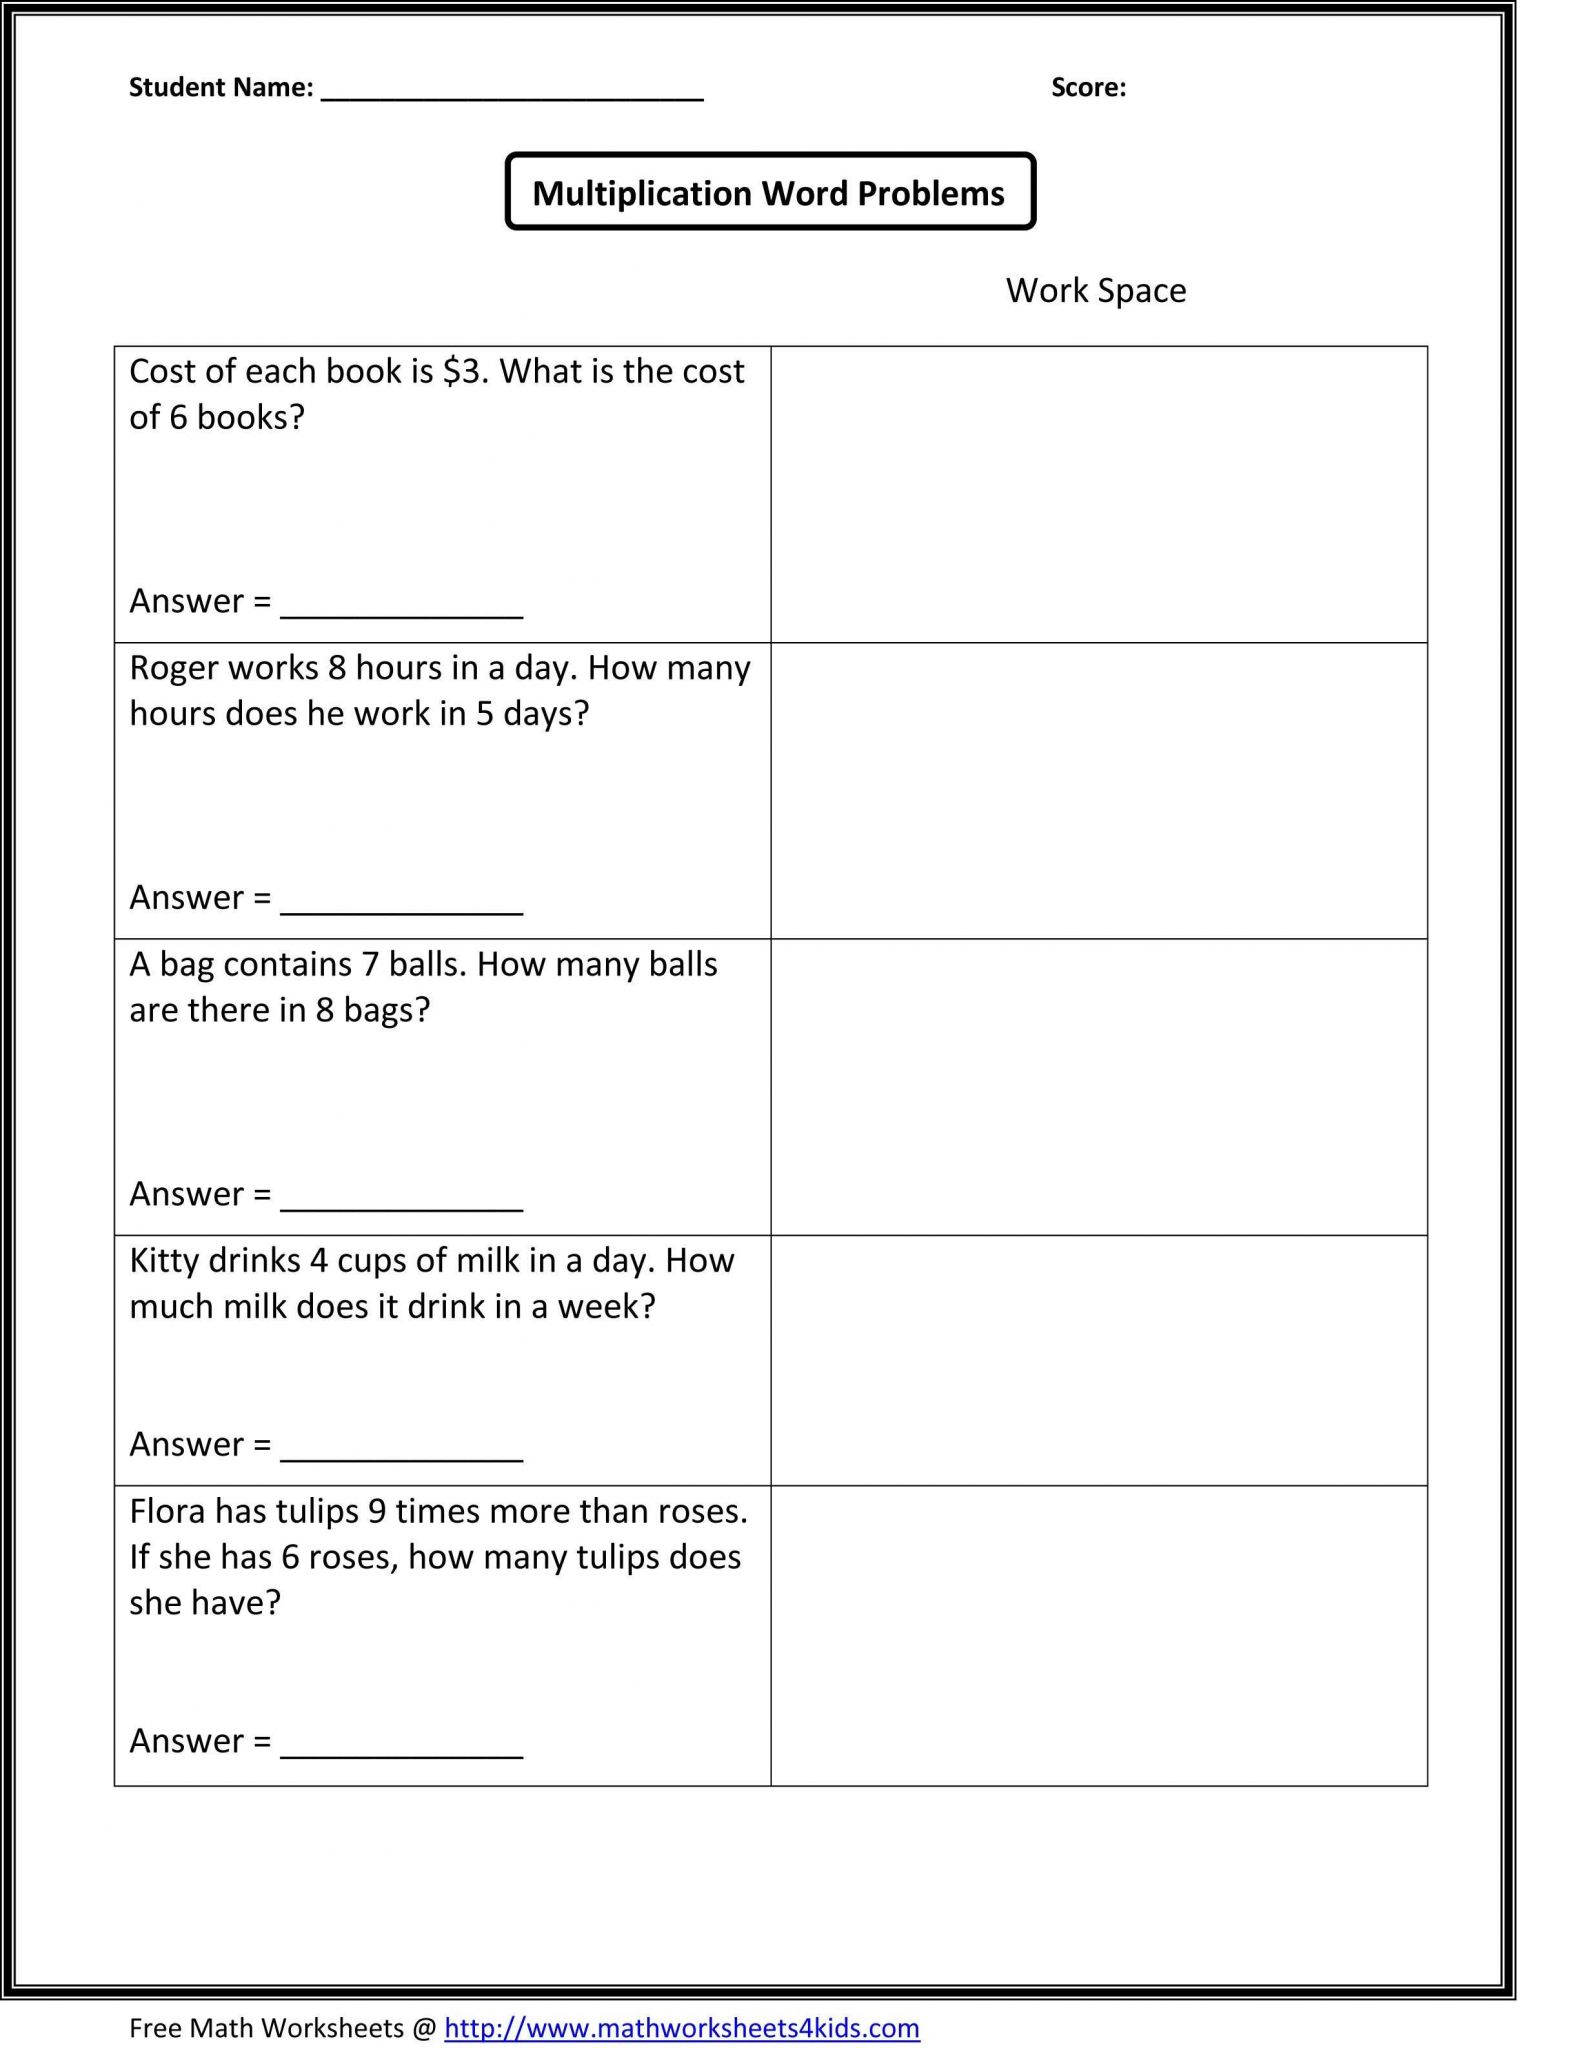 Proportion Word Problems Worksheet 7th Grade Also 6th Grade Math Word Problems Worksheets Elegant 8th Grade Math Word